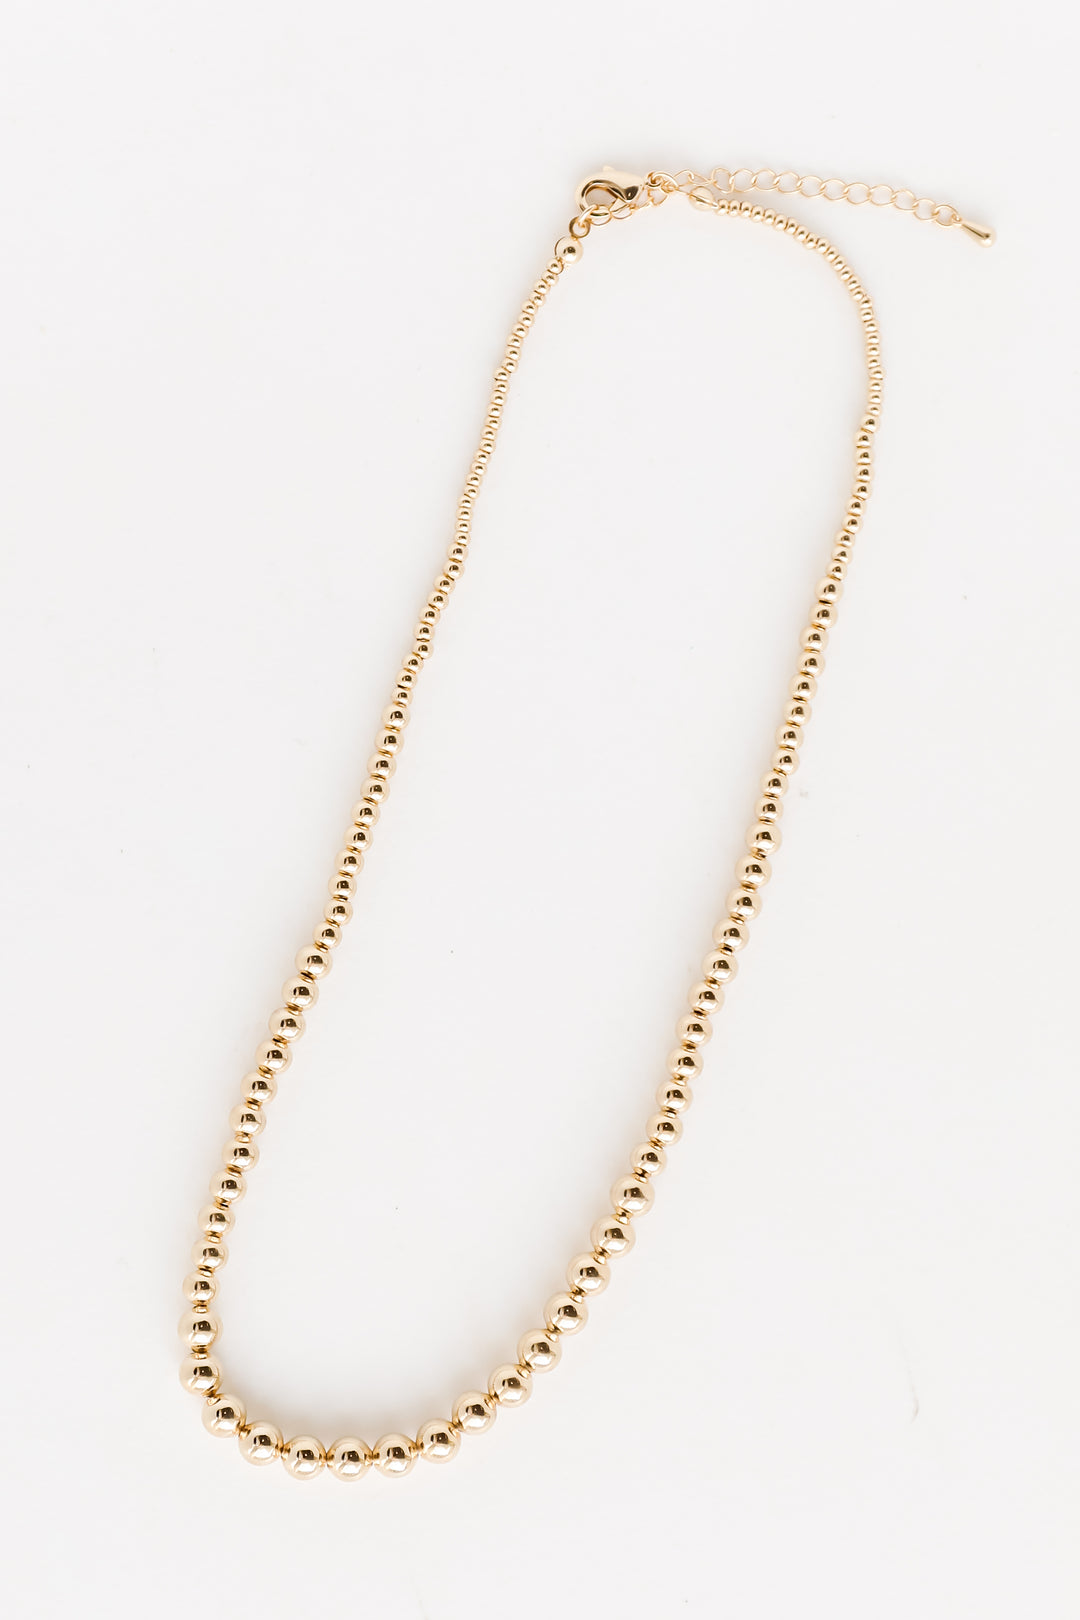 Gold Beaded Necklace flat lay